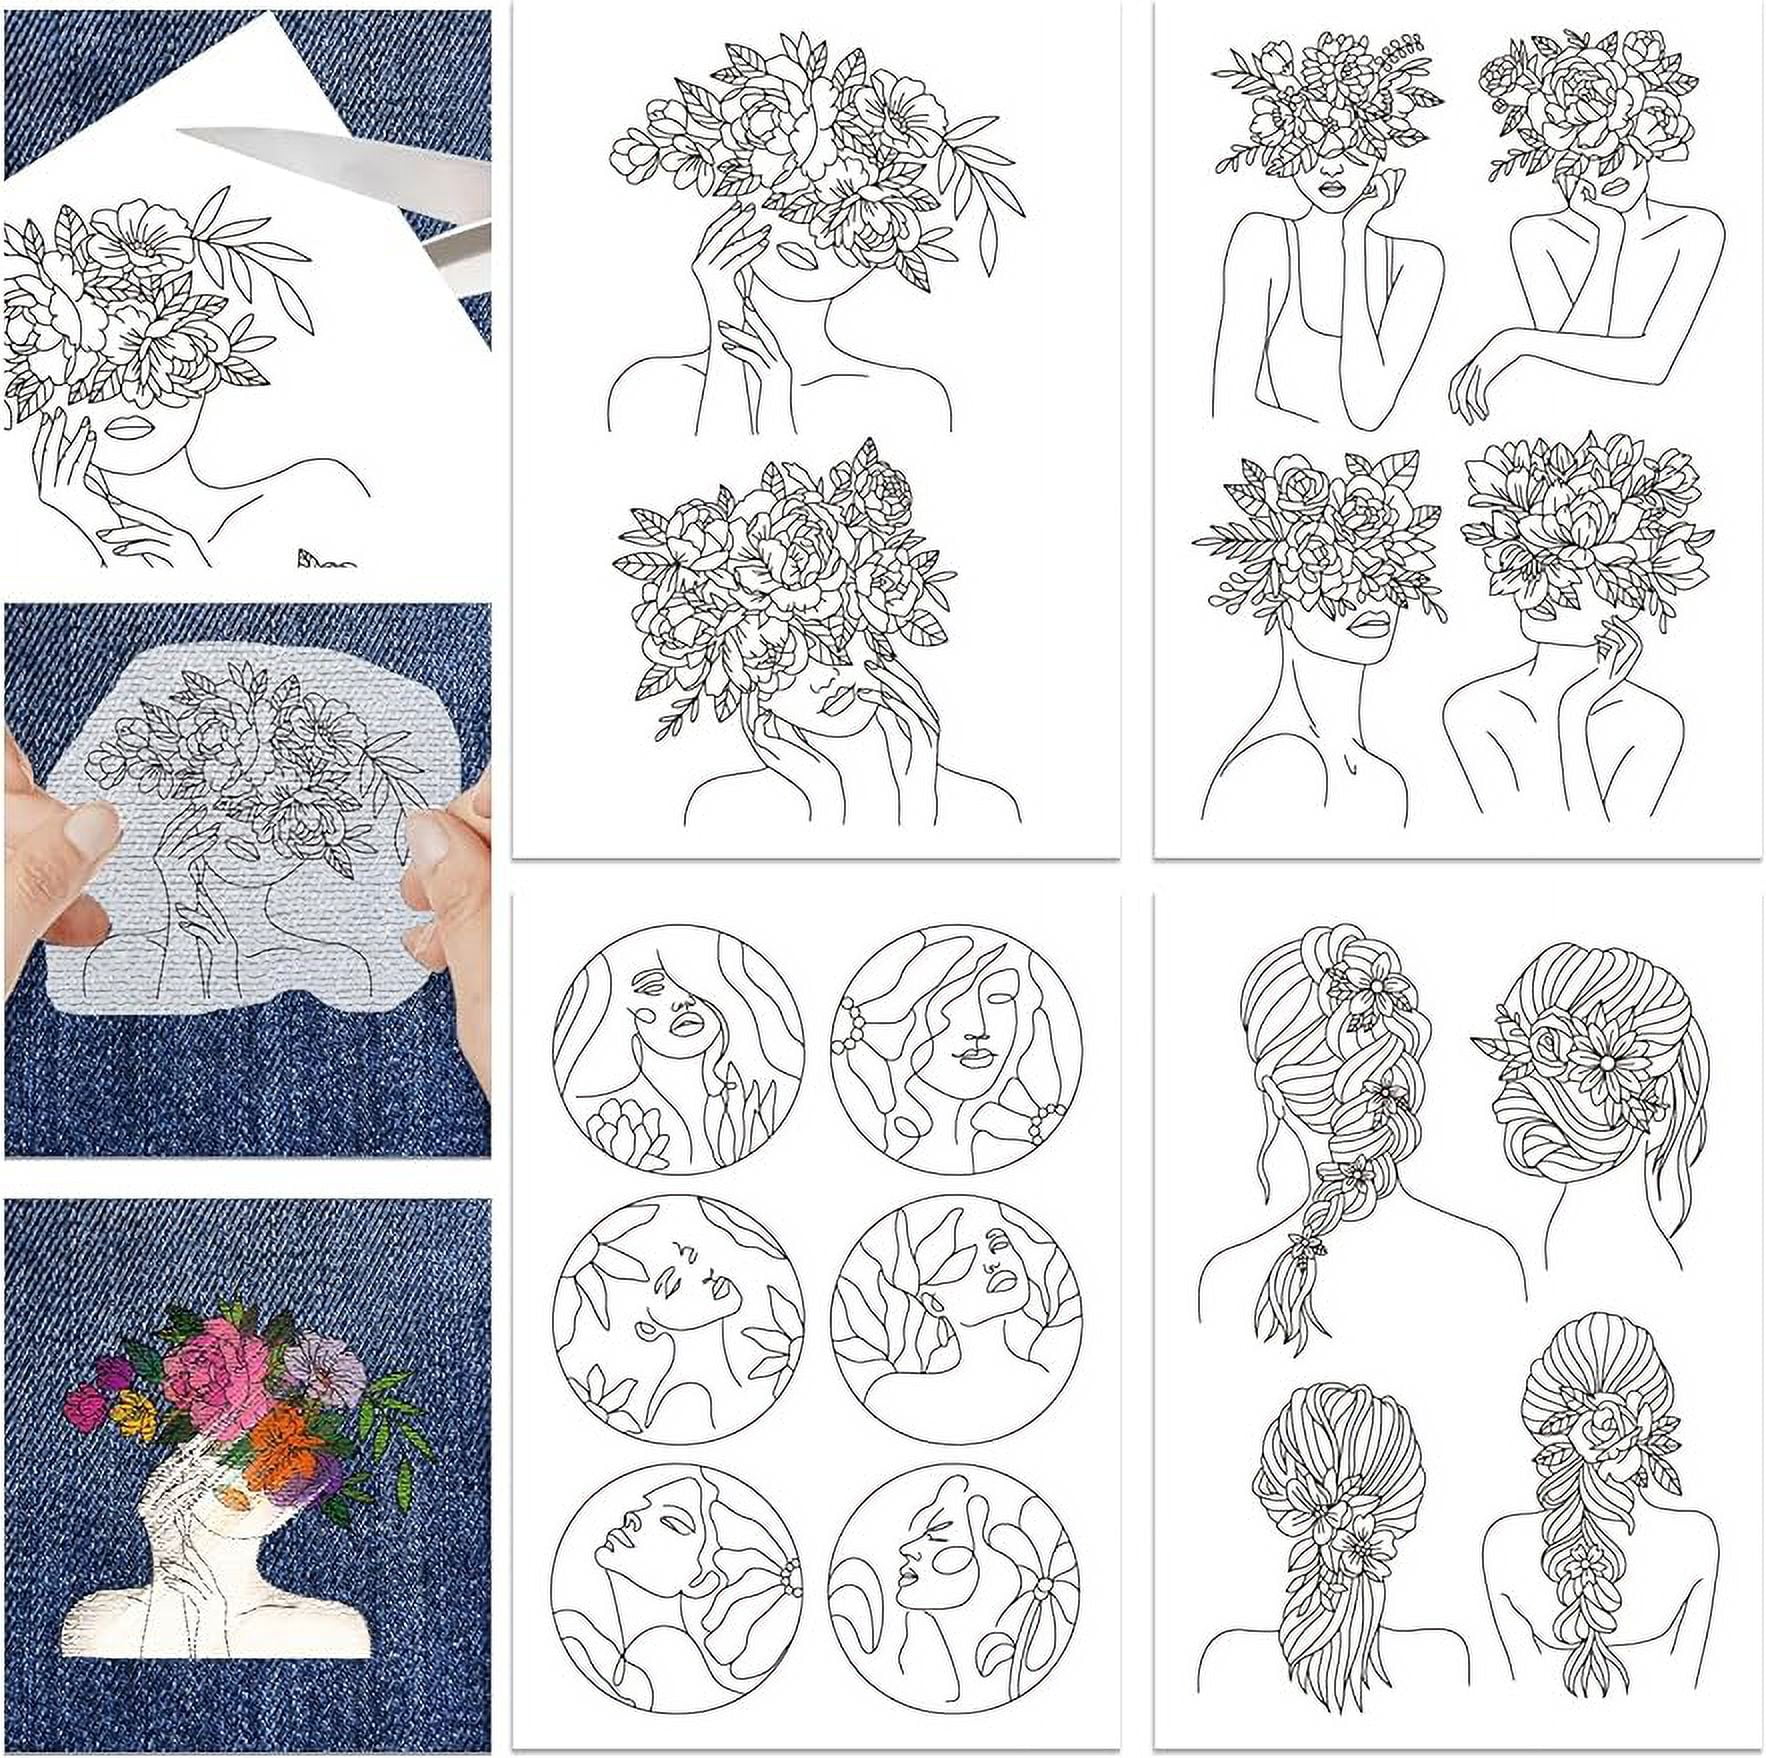  Peel and Stick Pattern Stabilizers, Hand Stitch Embroidery  Dissolving Transfer Paper Stabilizer Patterns, Water Soluble Peel and Wash  Away Designs Will Dissolve, Flowers Animals Nature